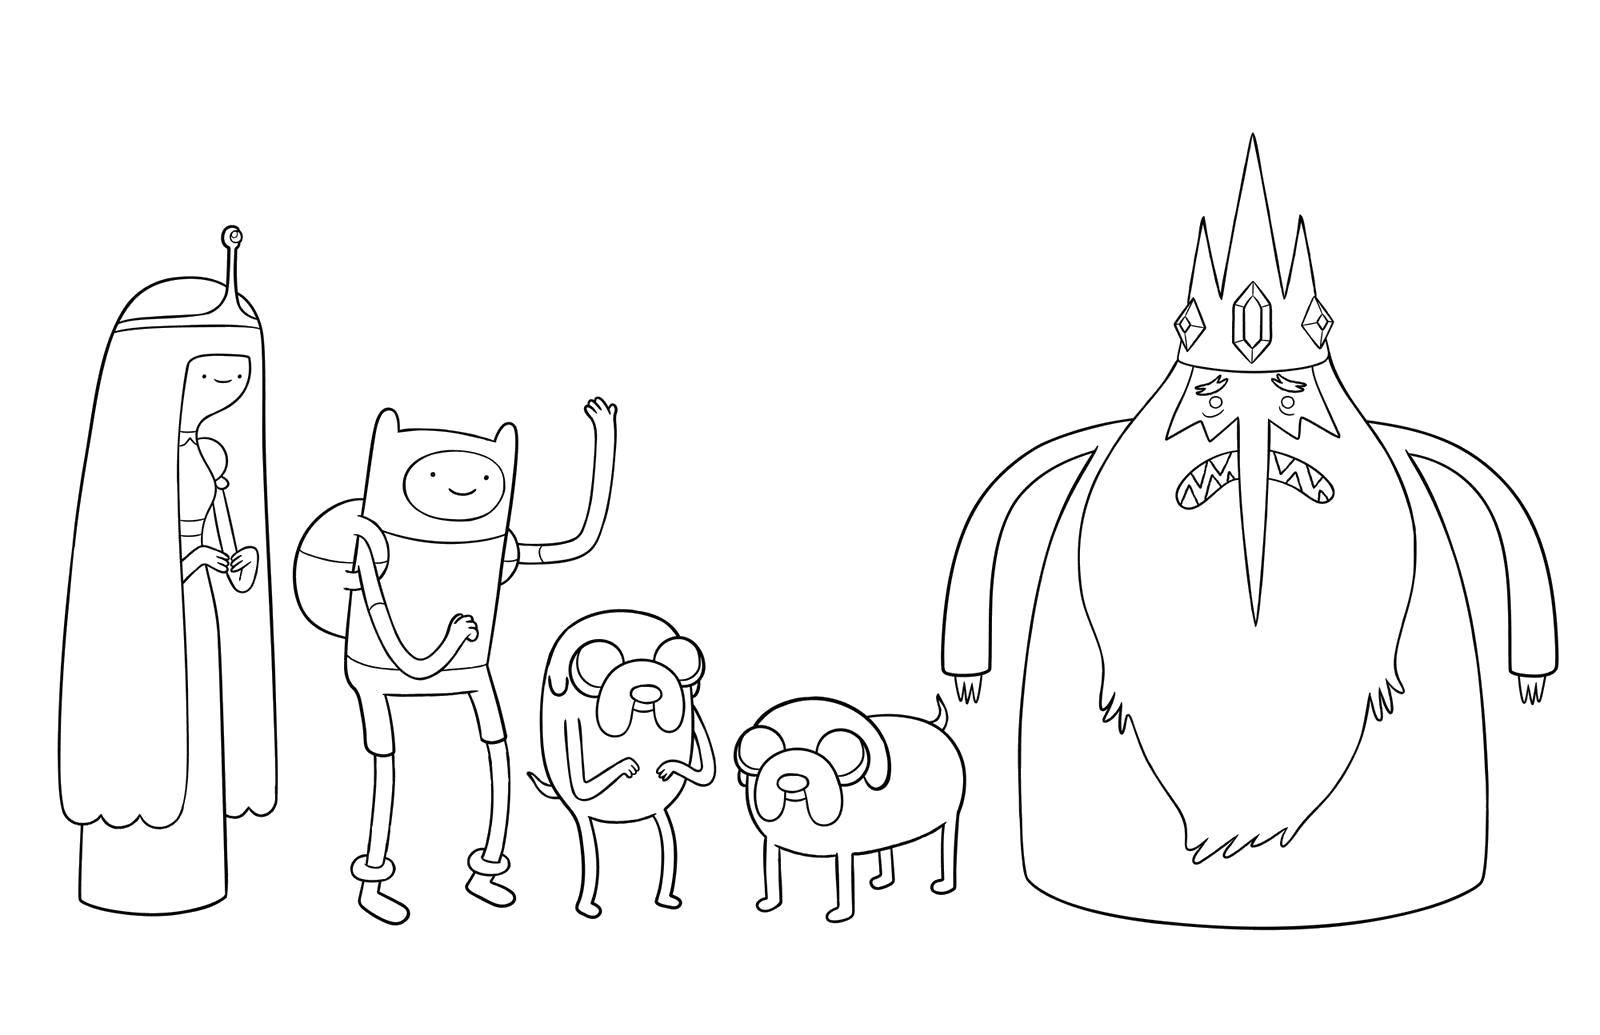 Coloring Princess bubblegum, Finn, Jake and ice king. Category adventure time. Tags:  The character from the cartoon, Adventure Time.